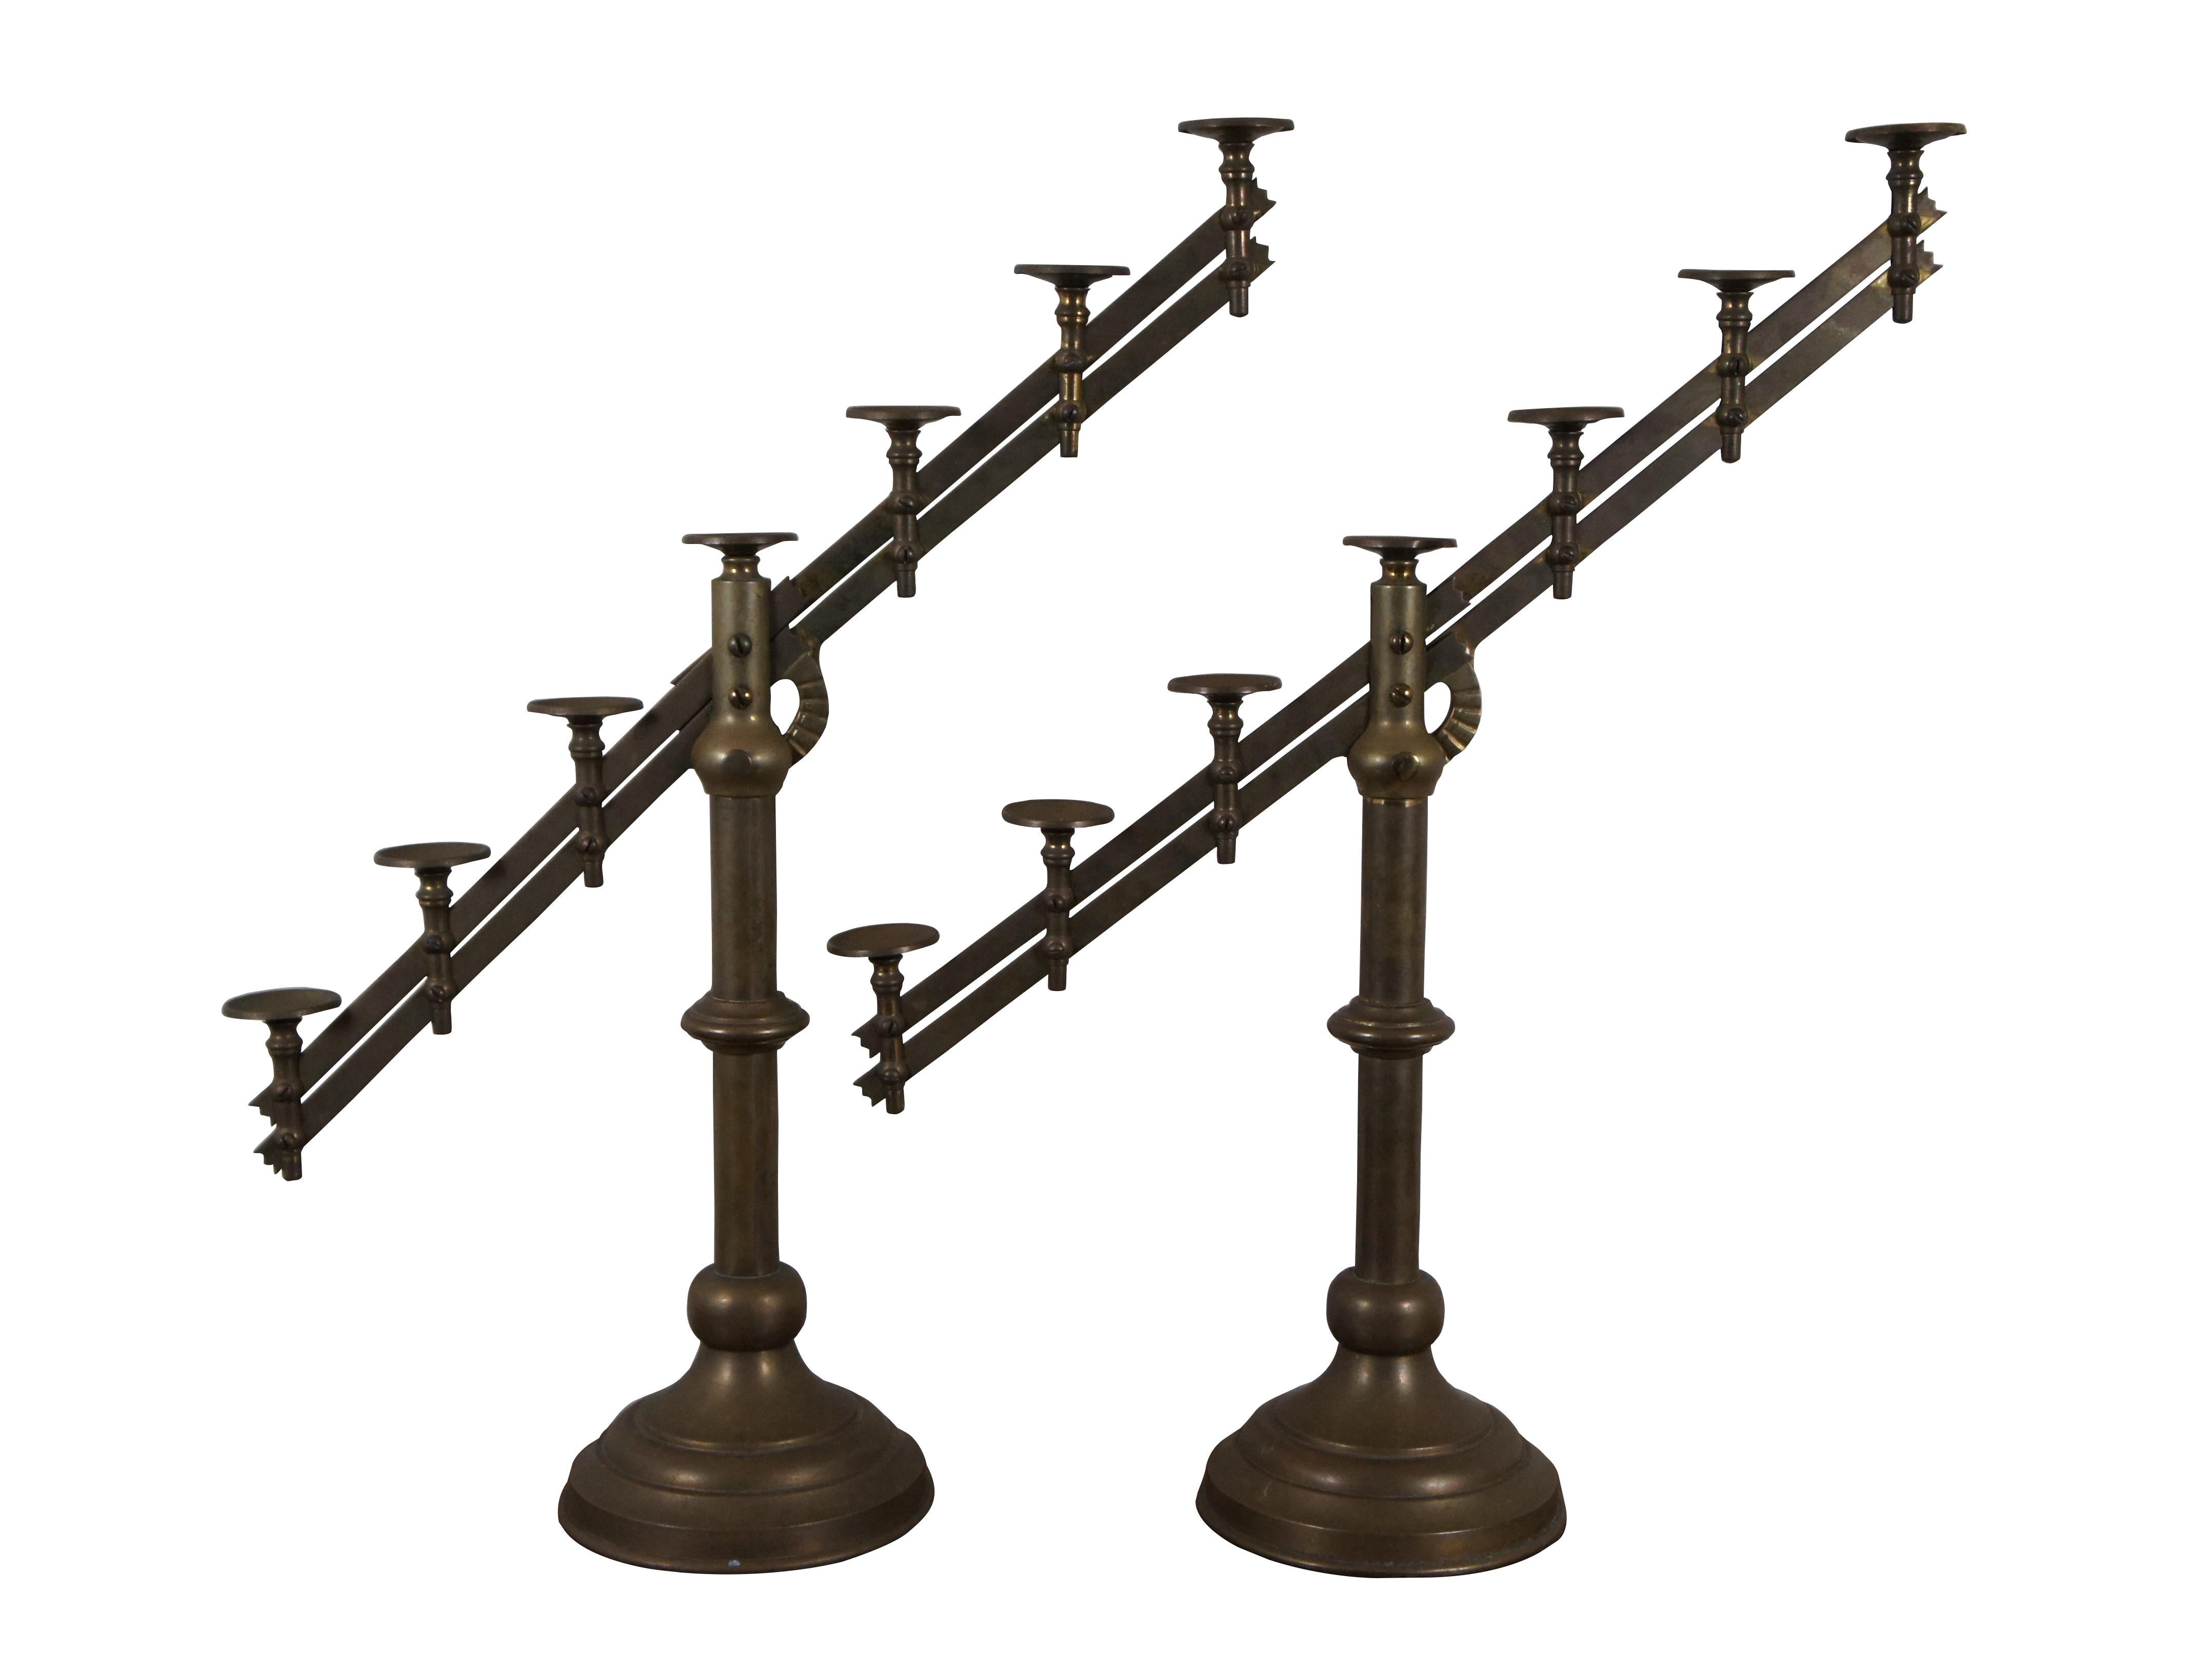 Late 19th century pair of brass seven light candelabras - church / temple / altar candlesticks - with rotating adjustable / articulating arms.

Dimensions:
7.25